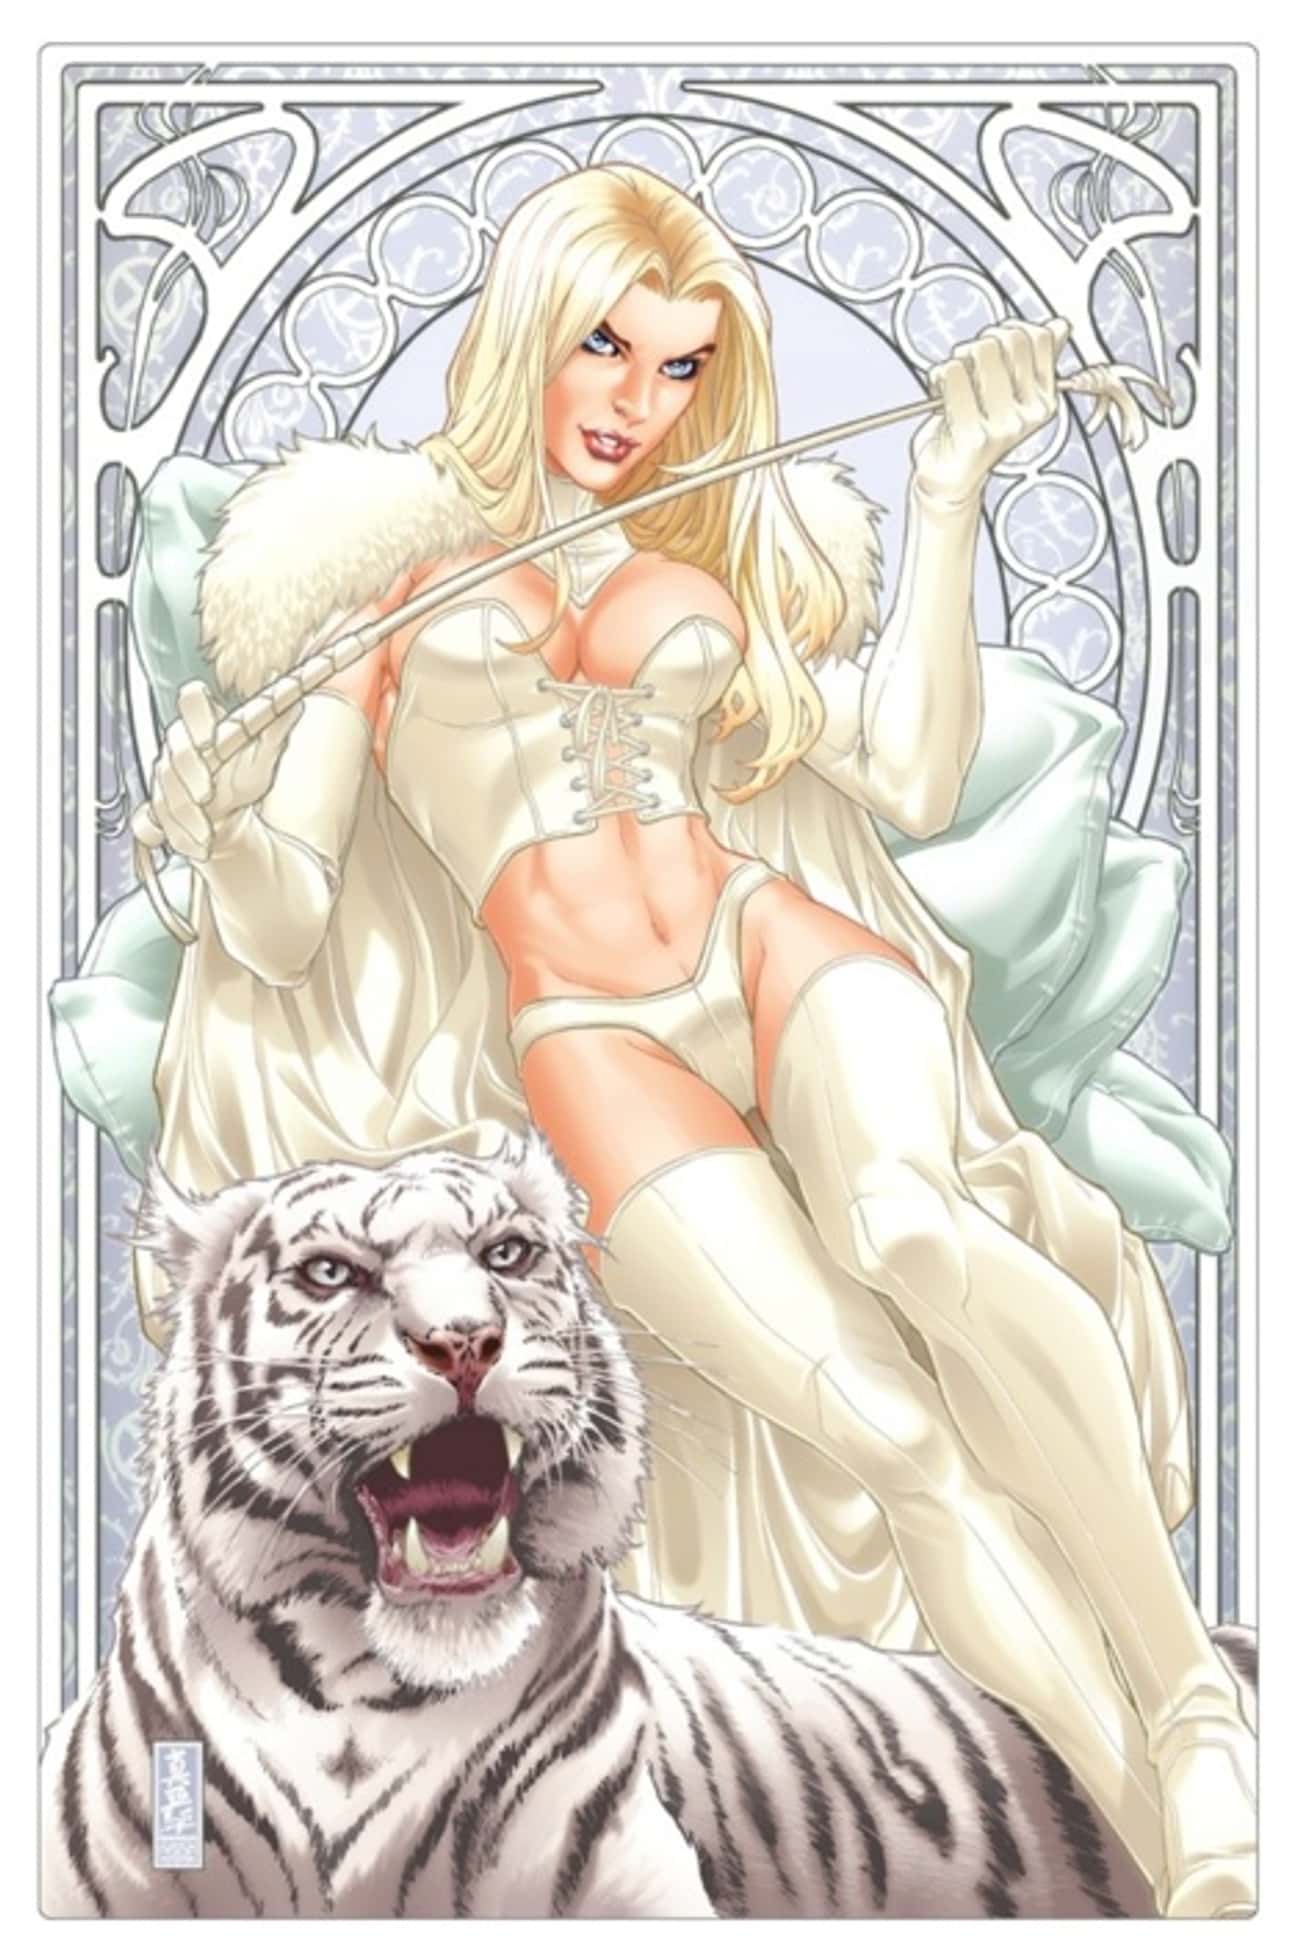 Emma Frost in White Original Outfit